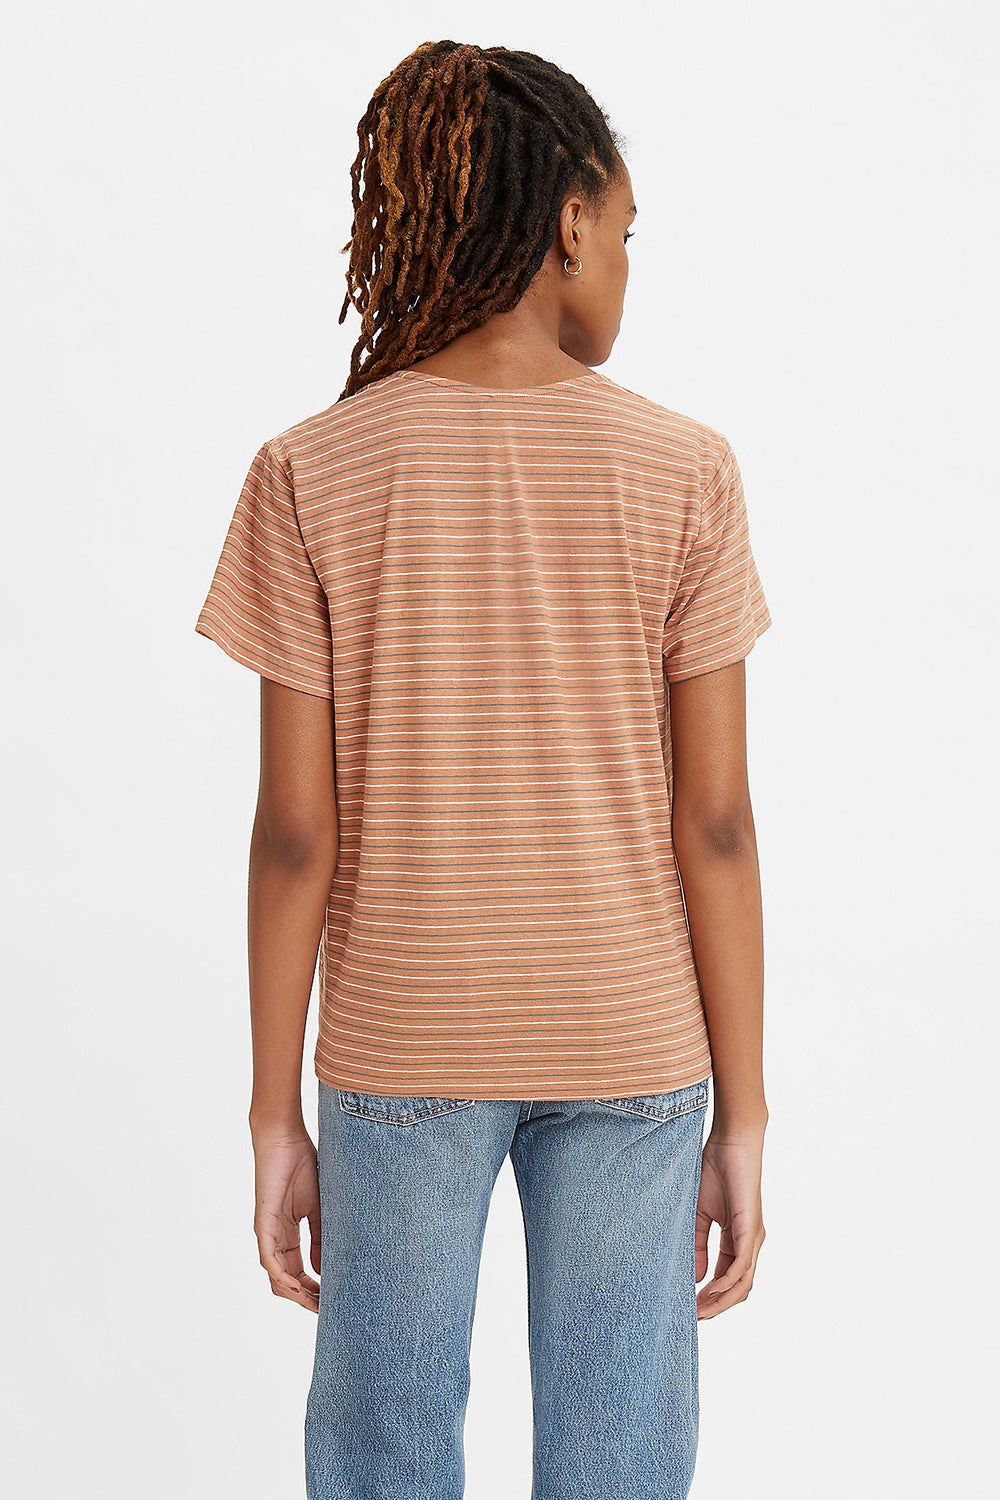 Levi's Made and Crafted Open Neck Tee Mocha Mousse